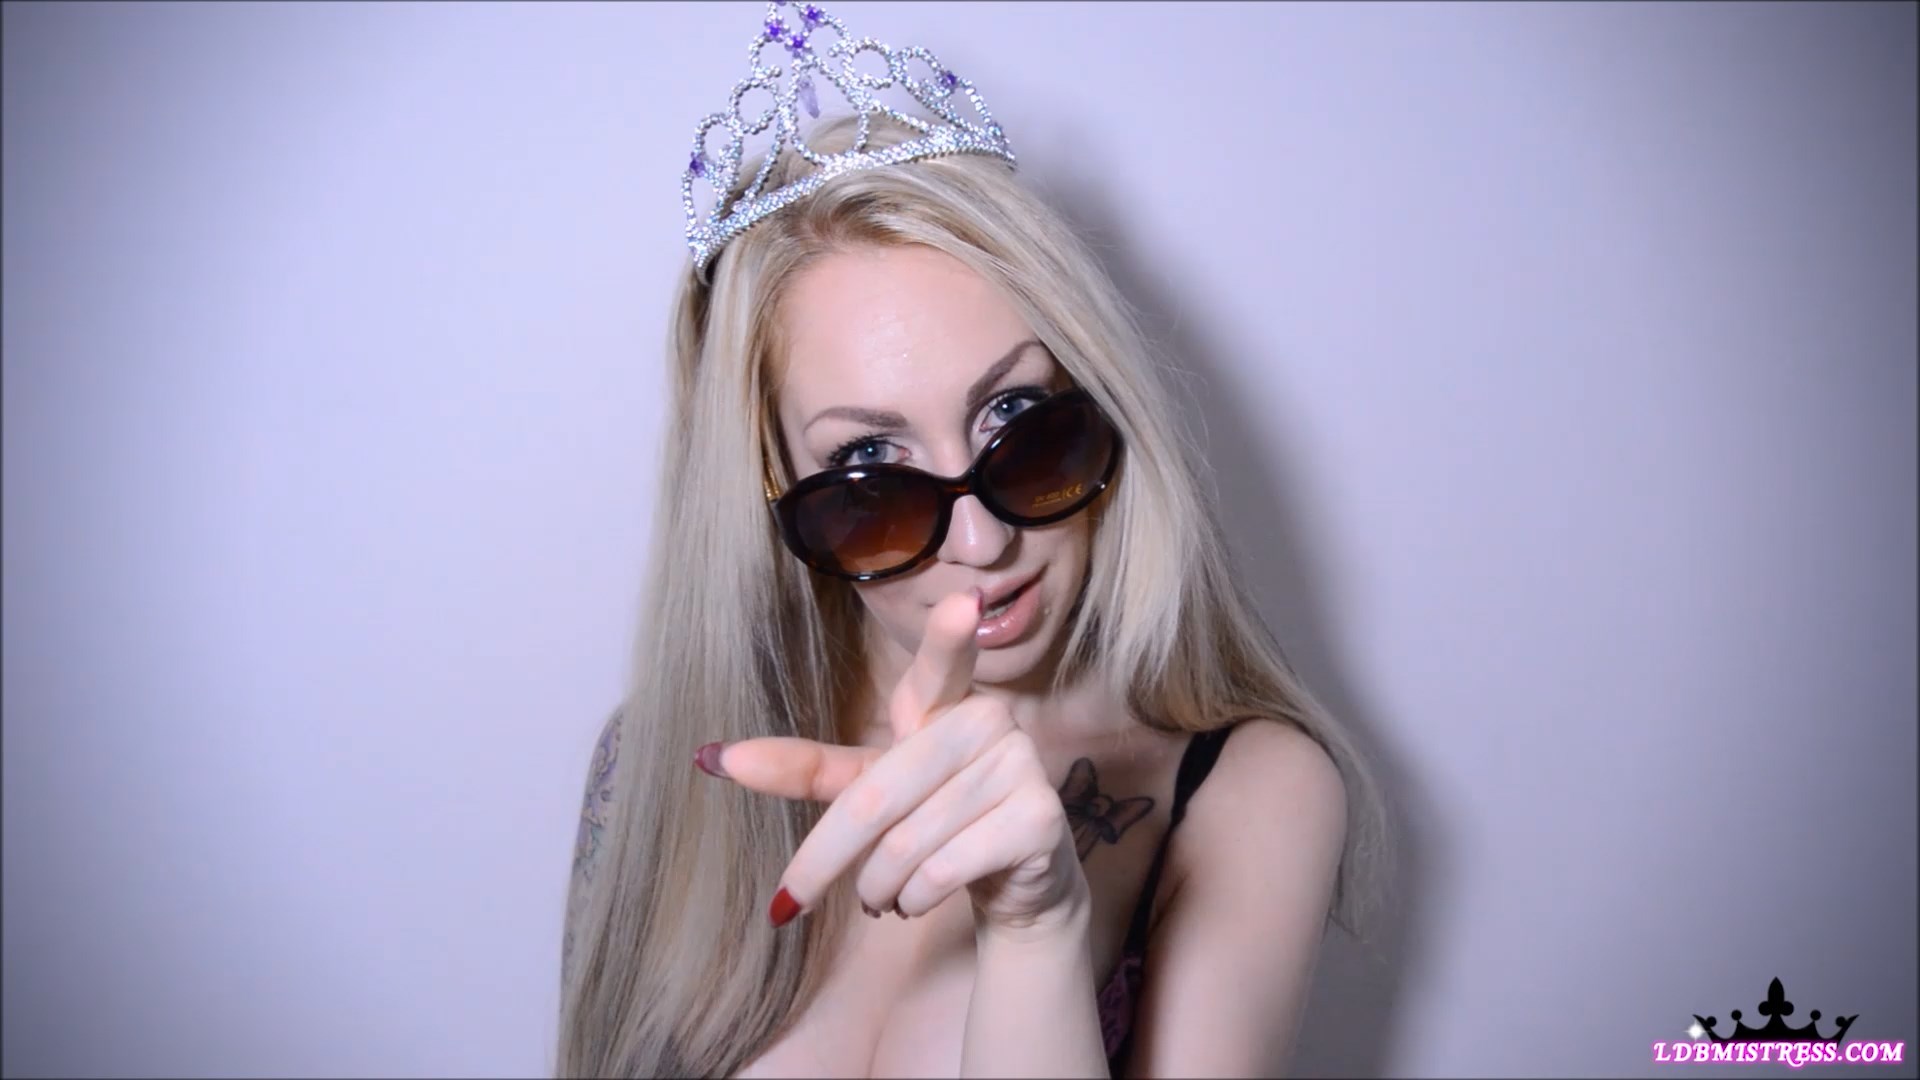 Goddess Isabel - My Special Gift, My Middle FInger 1080p